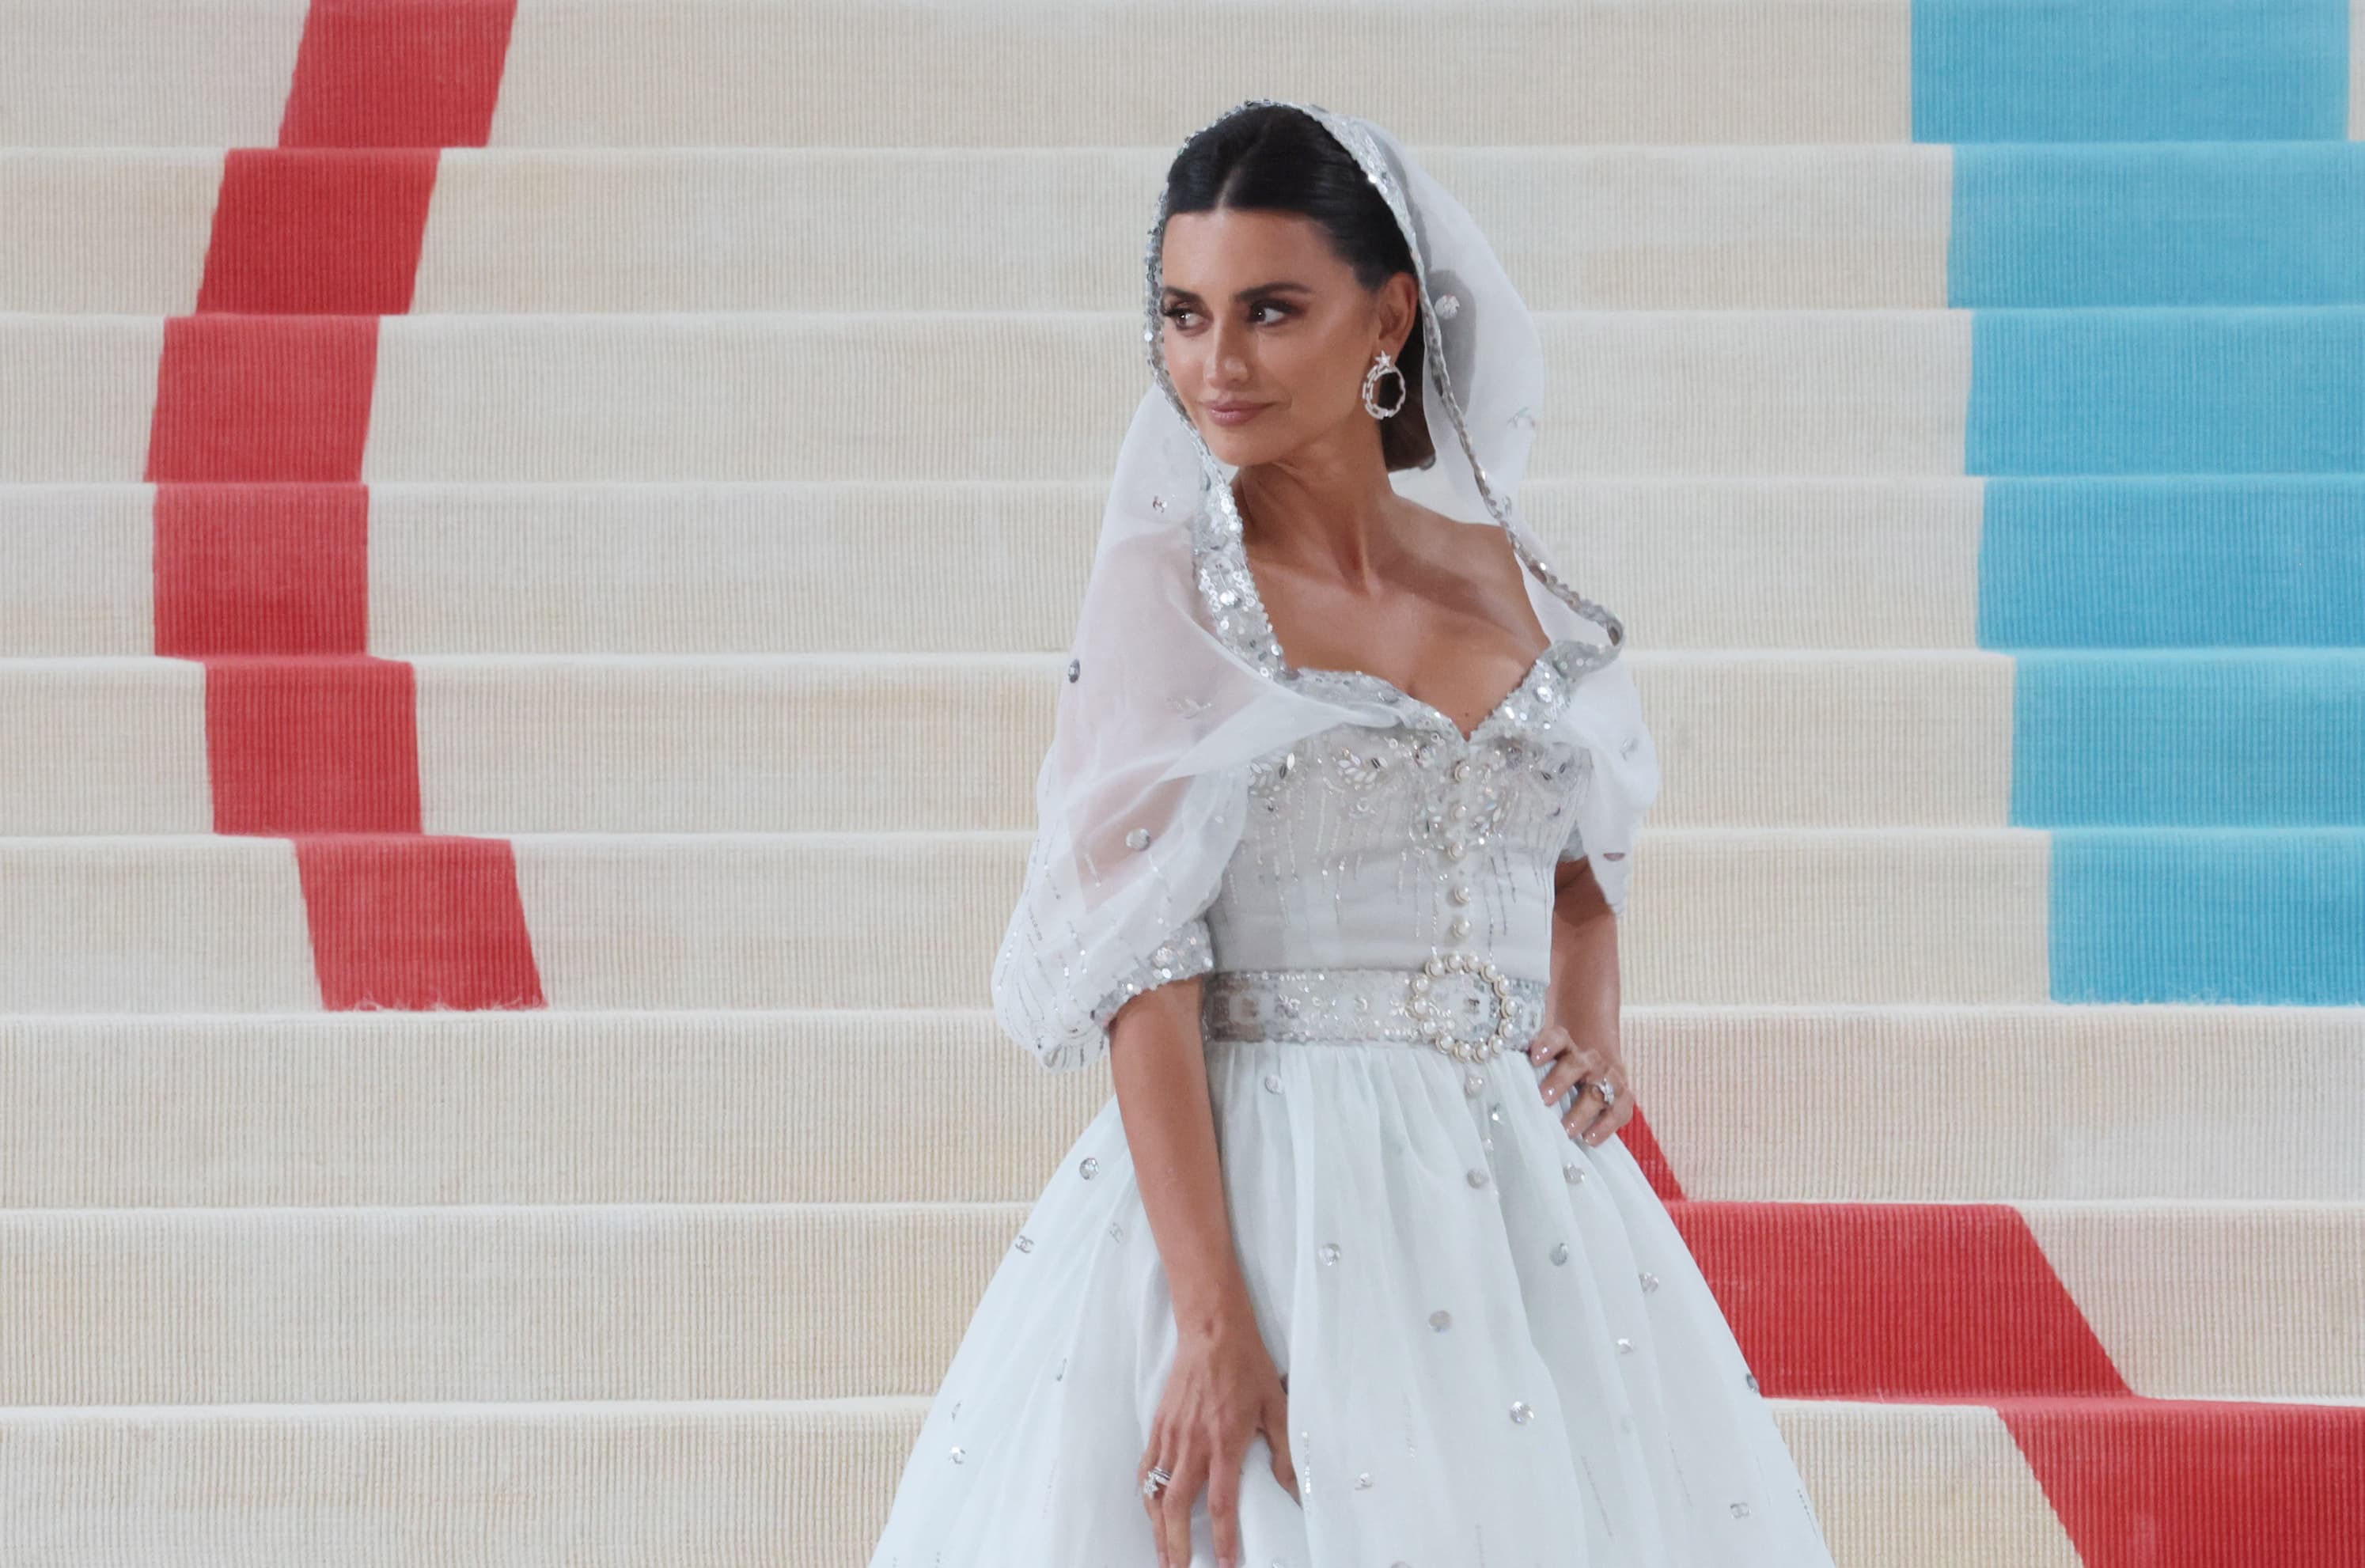 Penelope Cruz poses at the Met Gala, an annual fundraising gala held for the benefit of the Metropolitan Museum of Art's Costume Institute with this year's theme "Karl Lagerfeld: A Line of Beauty", in New York City, New York, U.S., May 1, 2023. REUTERS/Brendan Mcdermid (REUTERS)